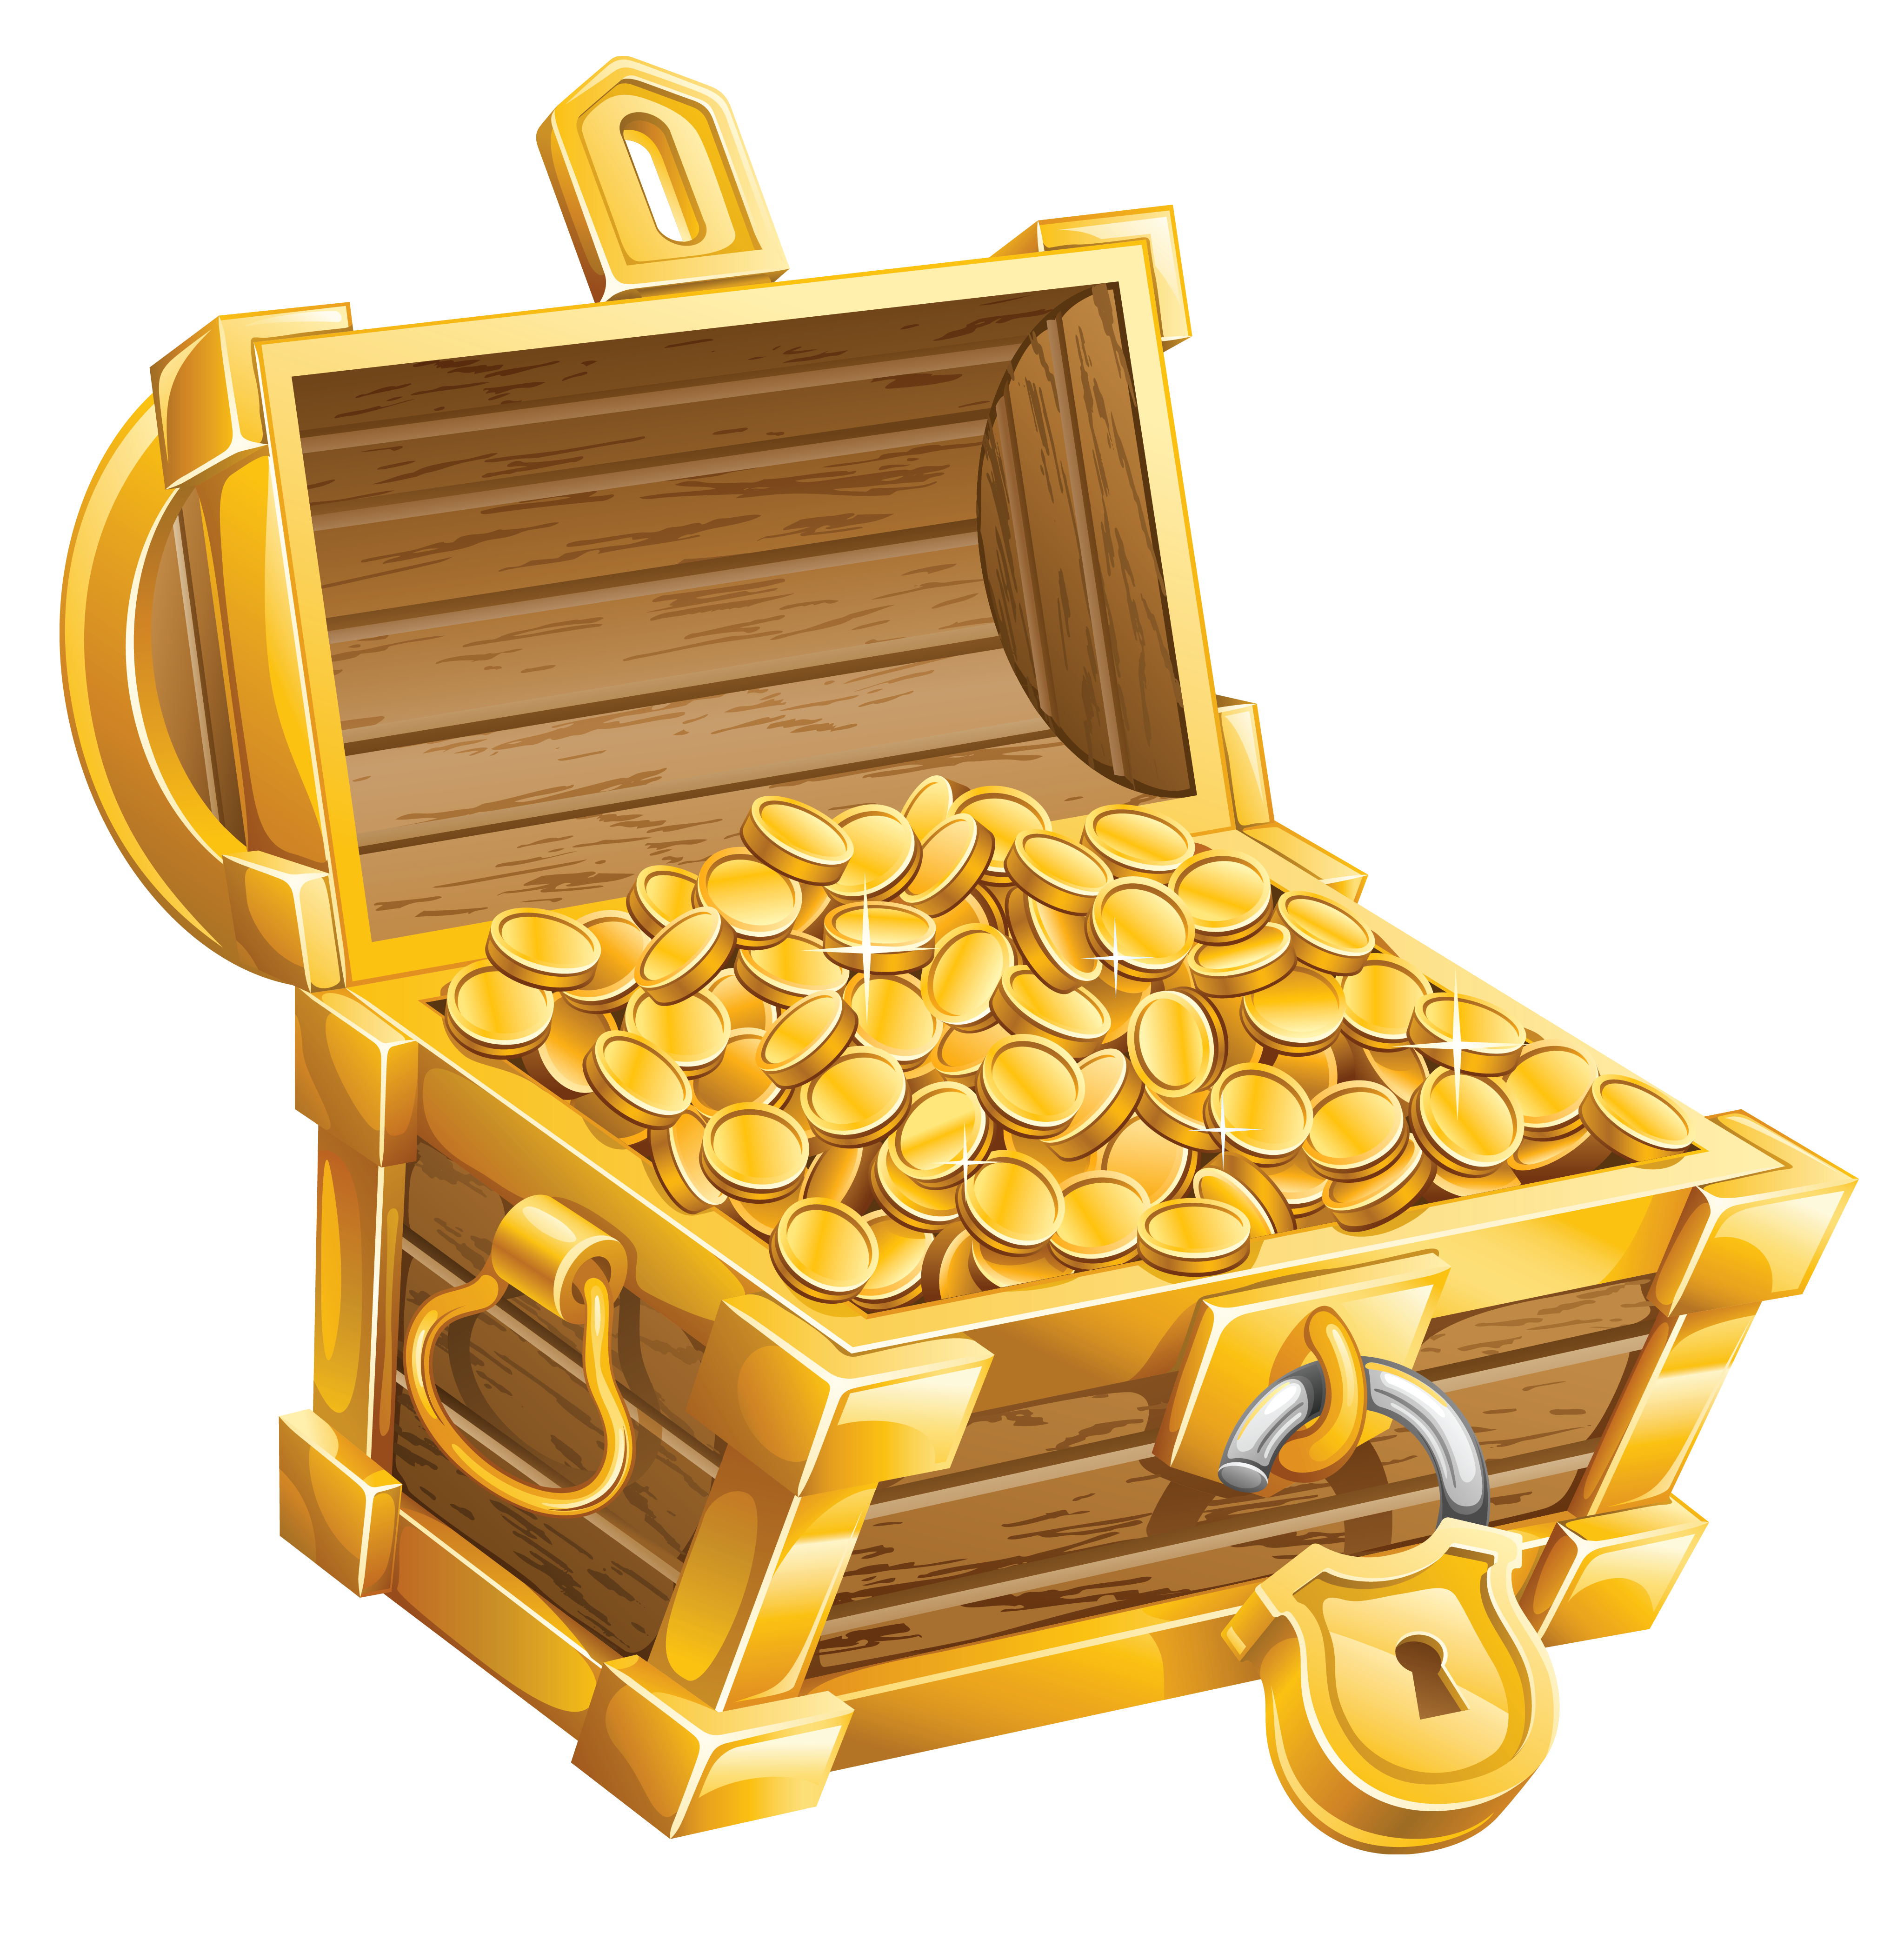 free clipart images treasure chest - photo #29